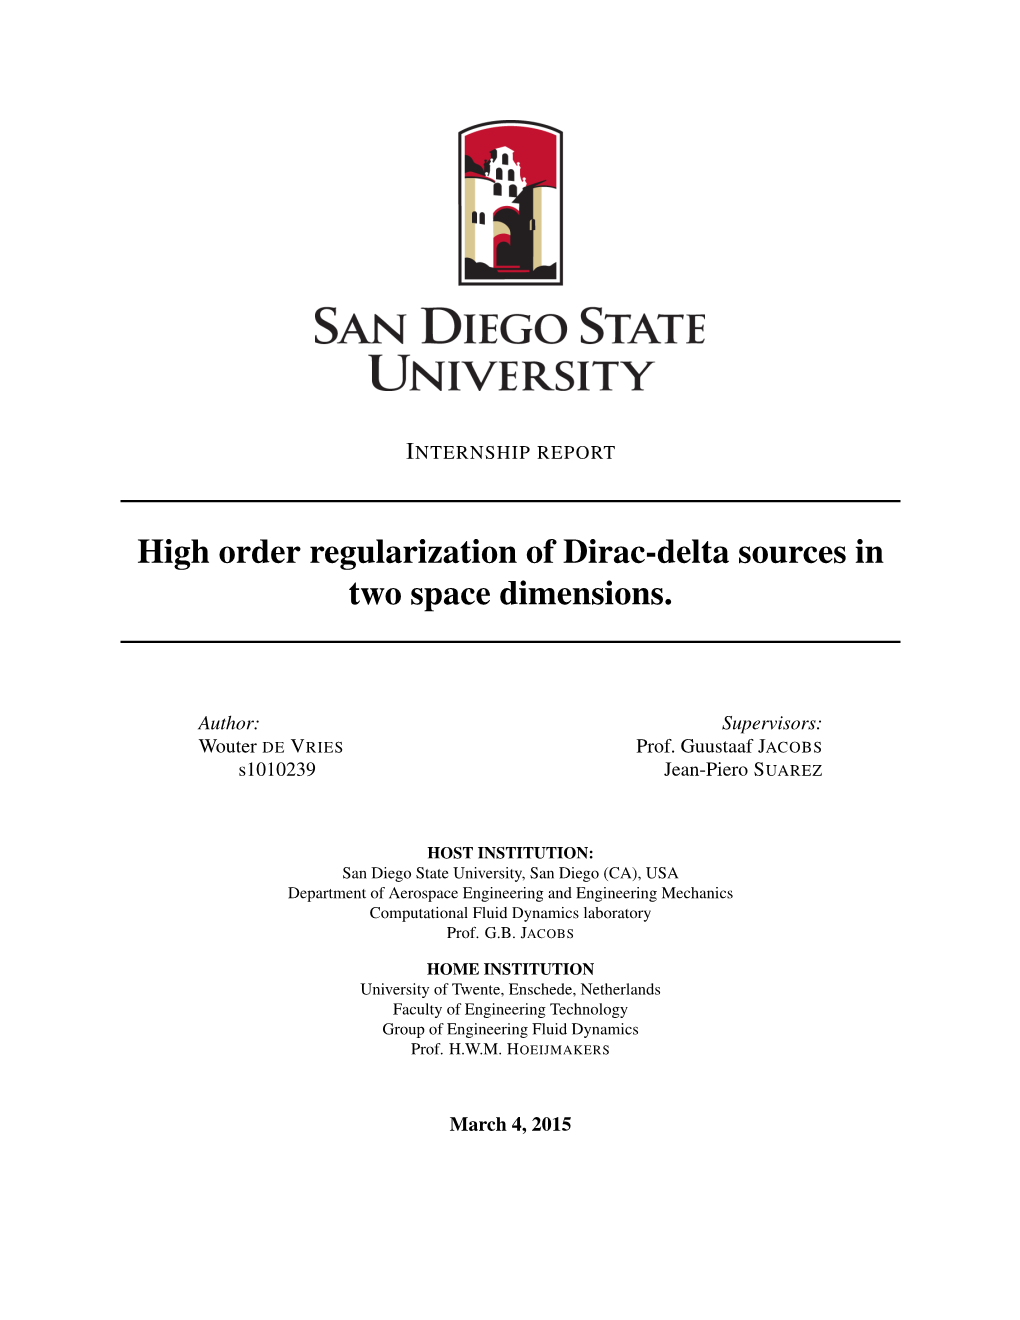 High Order Regularization of Dirac-Delta Sources in Two Space Dimensions